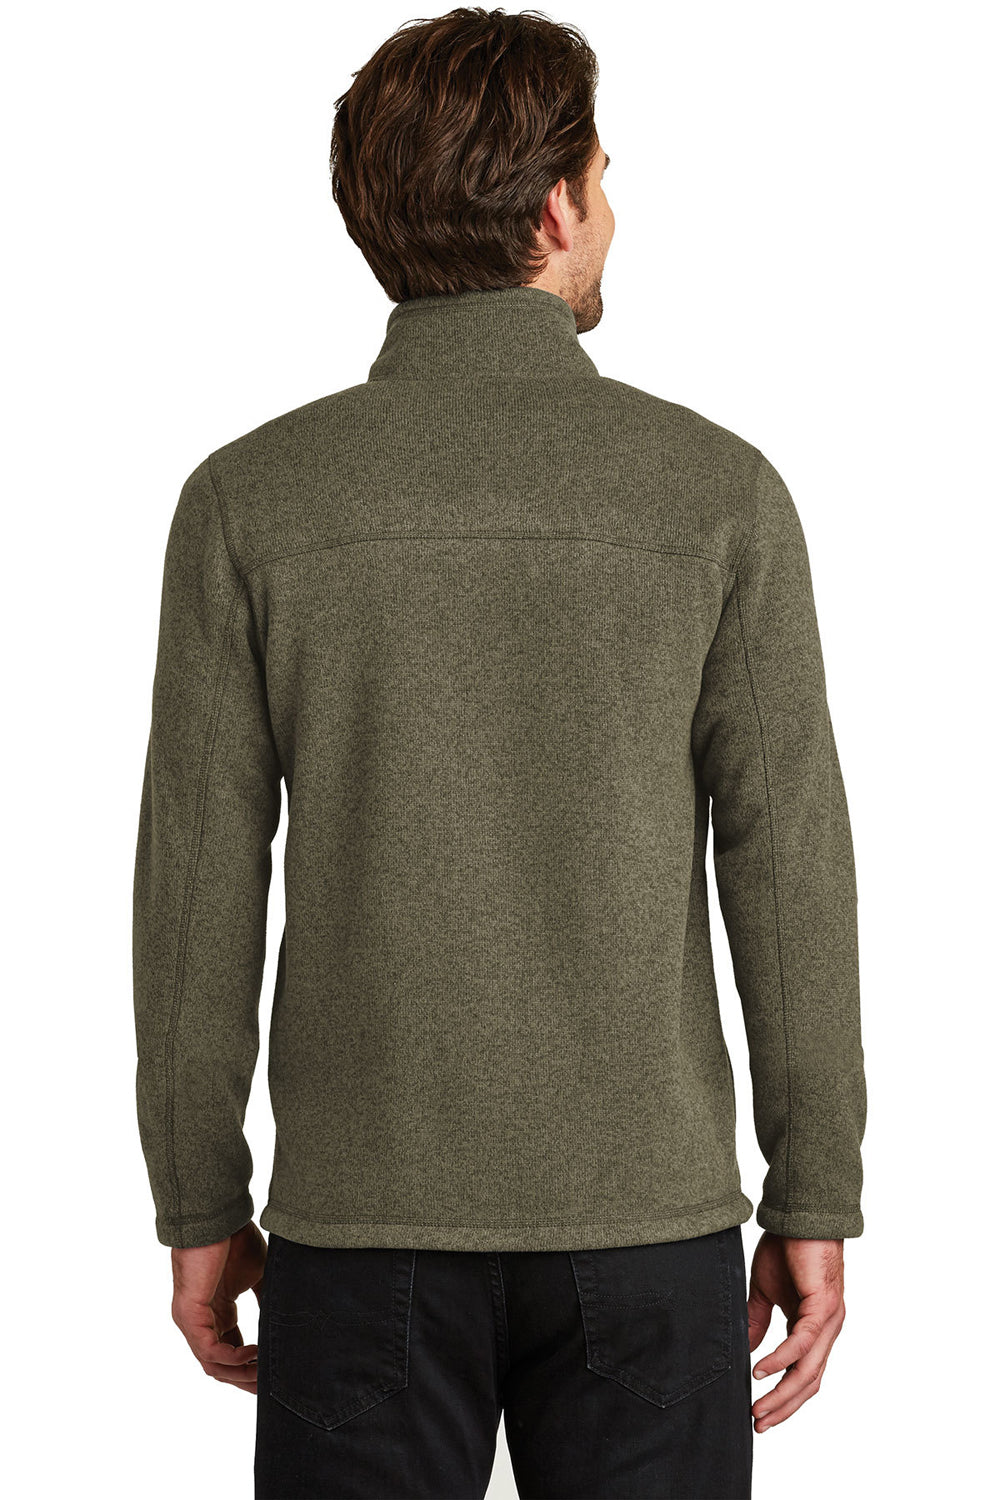 The North Face NF0A3LH7 Mens Full Zip Sweater Fleece Jacket Heather New Taupe Green Back